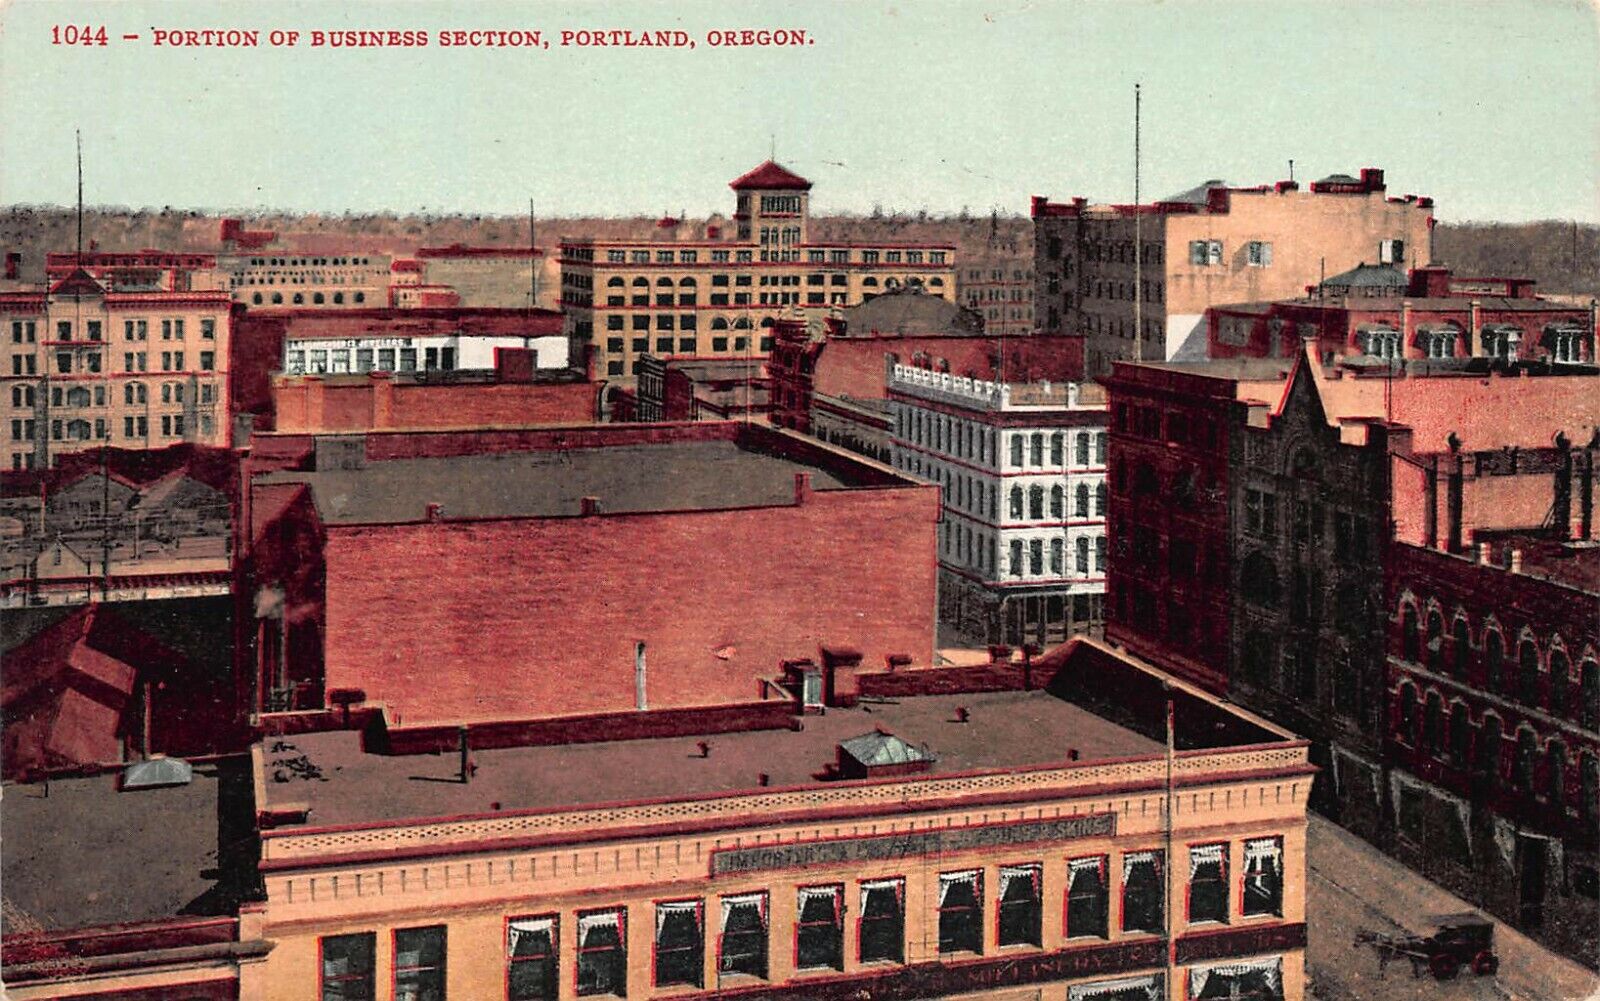 View of Portion of Business Section, Portland, Oregon, early postcard, unused